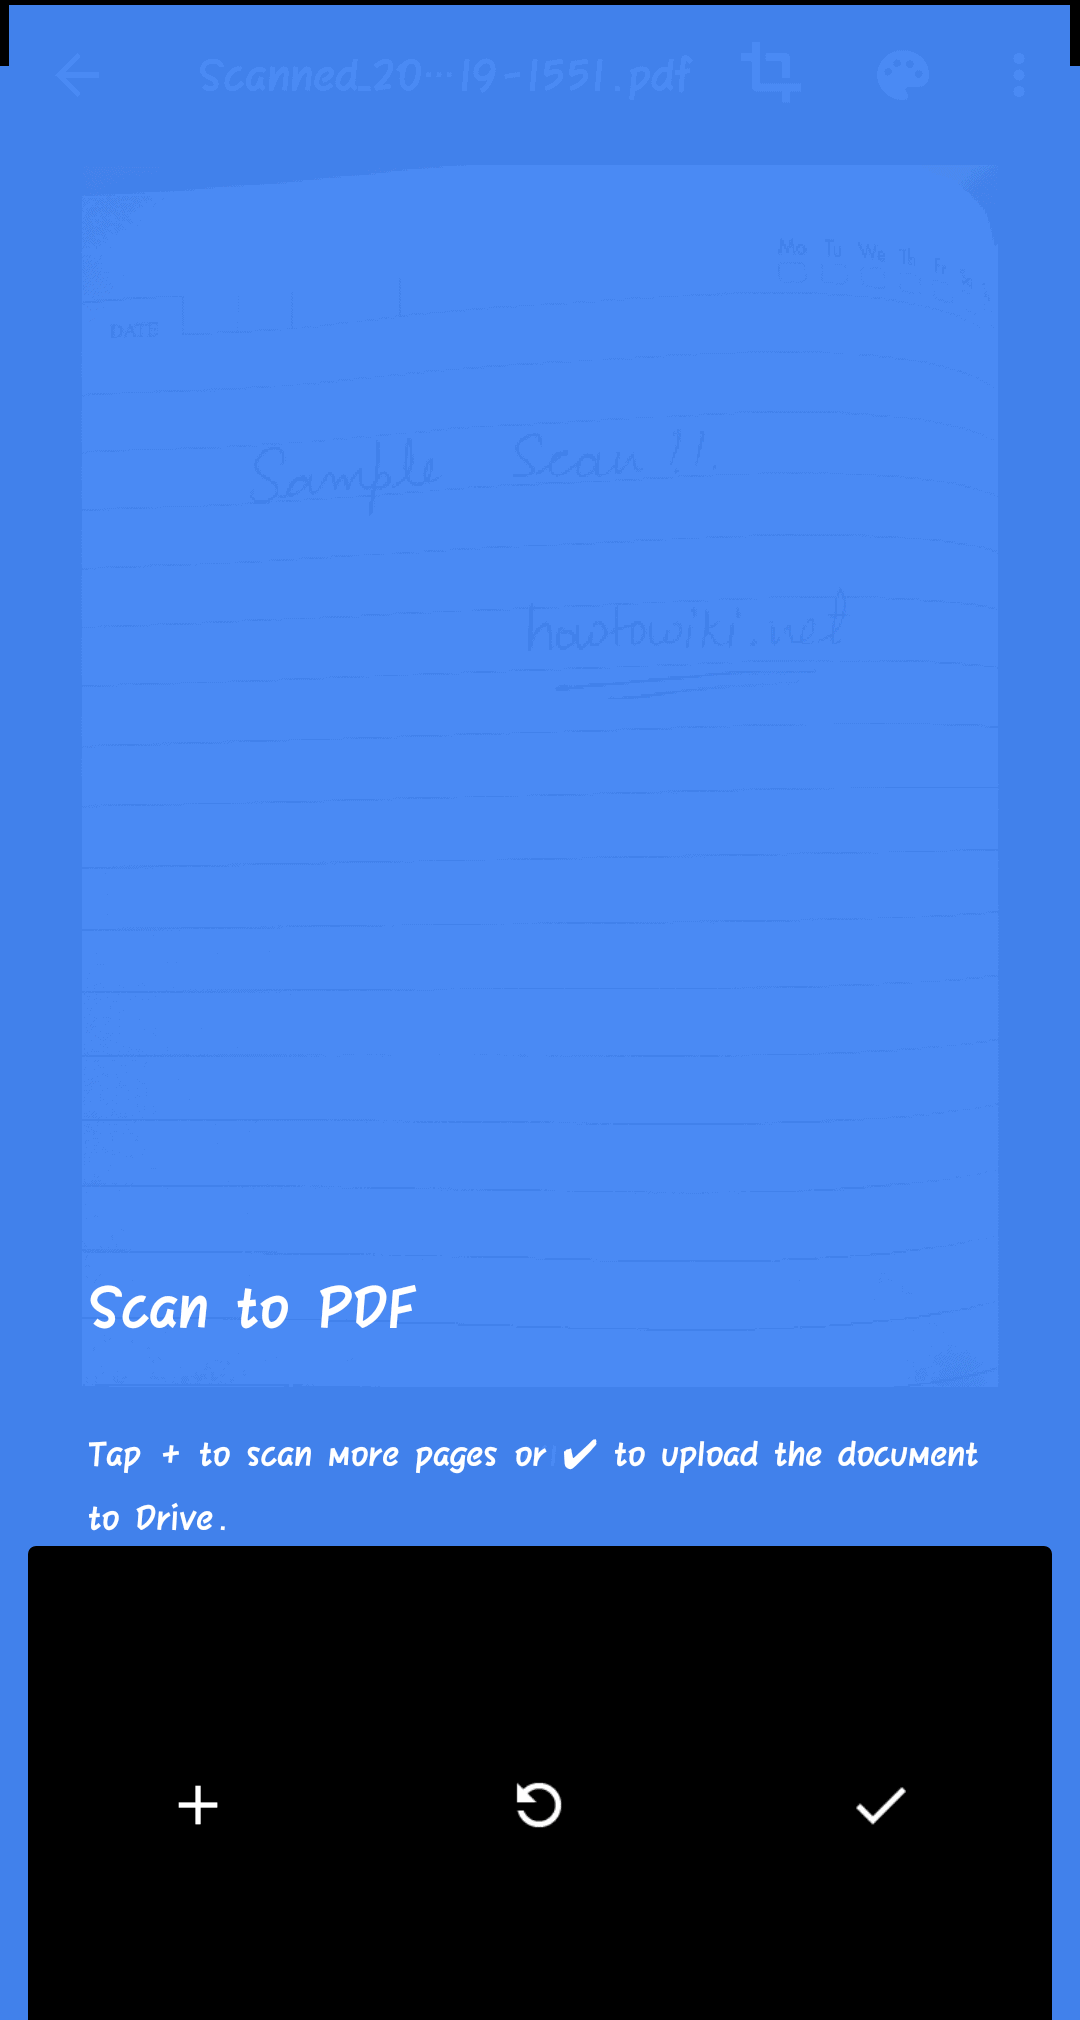 How to create pdf in mobile